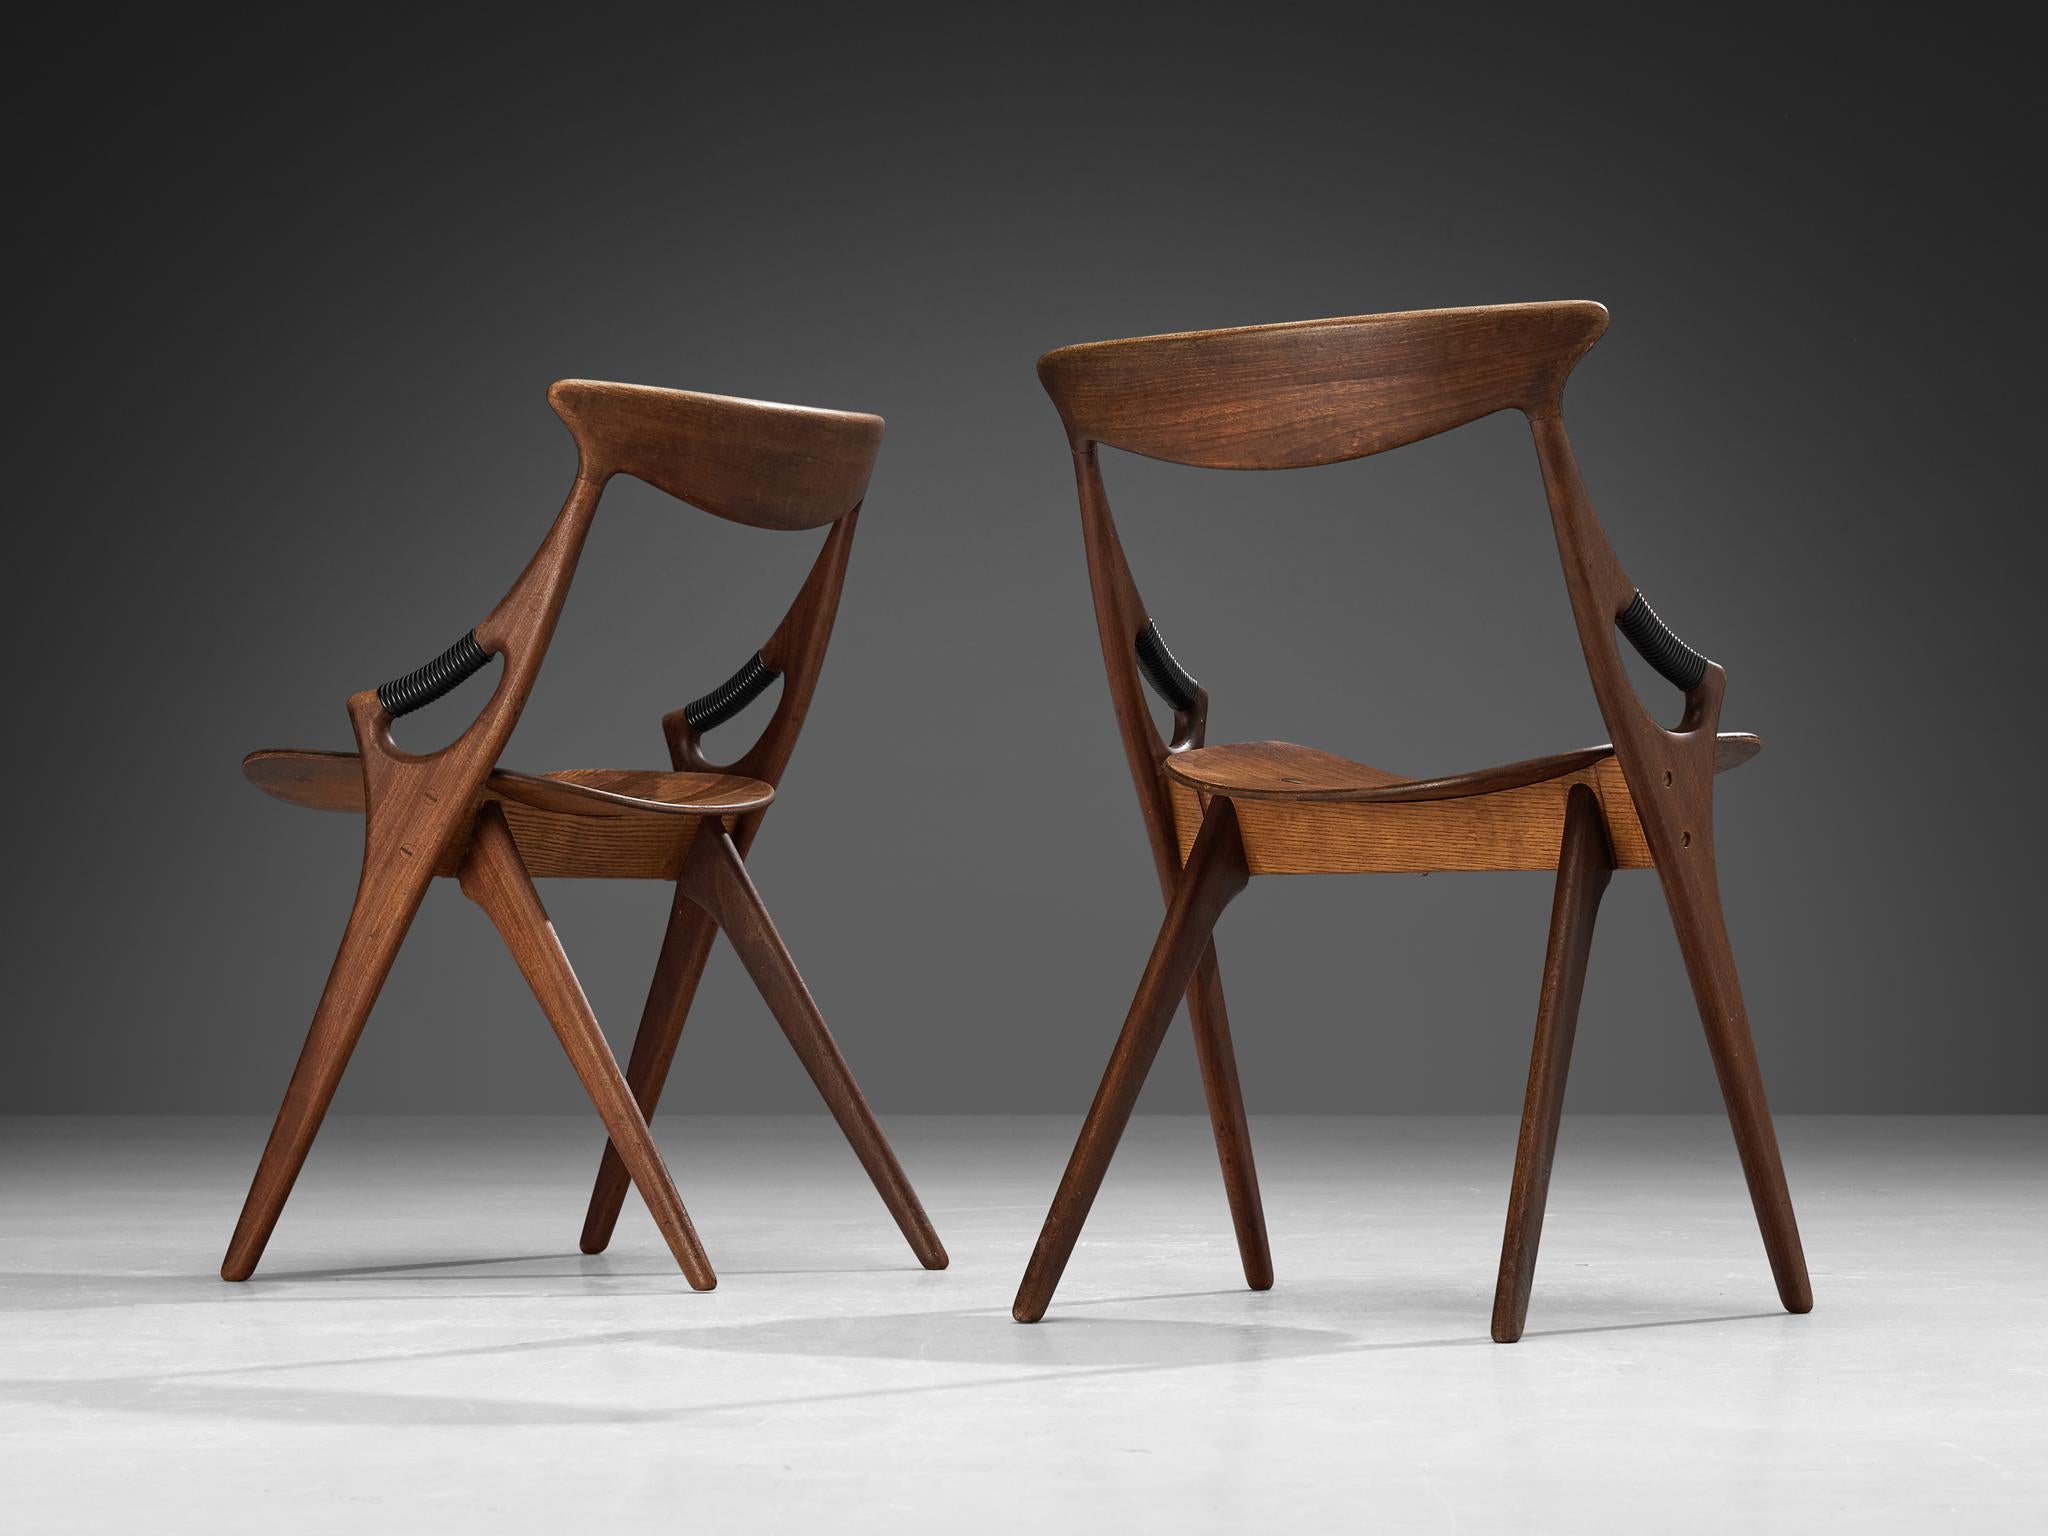 Arne Hovmand-Olsen for Mogens Kold Møbelfabrik, dining chairs, model 71, mahogany, brass, Denmark, 1959 

This sculptural set of dining chairs is designed by the Dane Arne Hovmand-Olsen for Mogens Kold Møbelfabrik. The chairs are organic in their